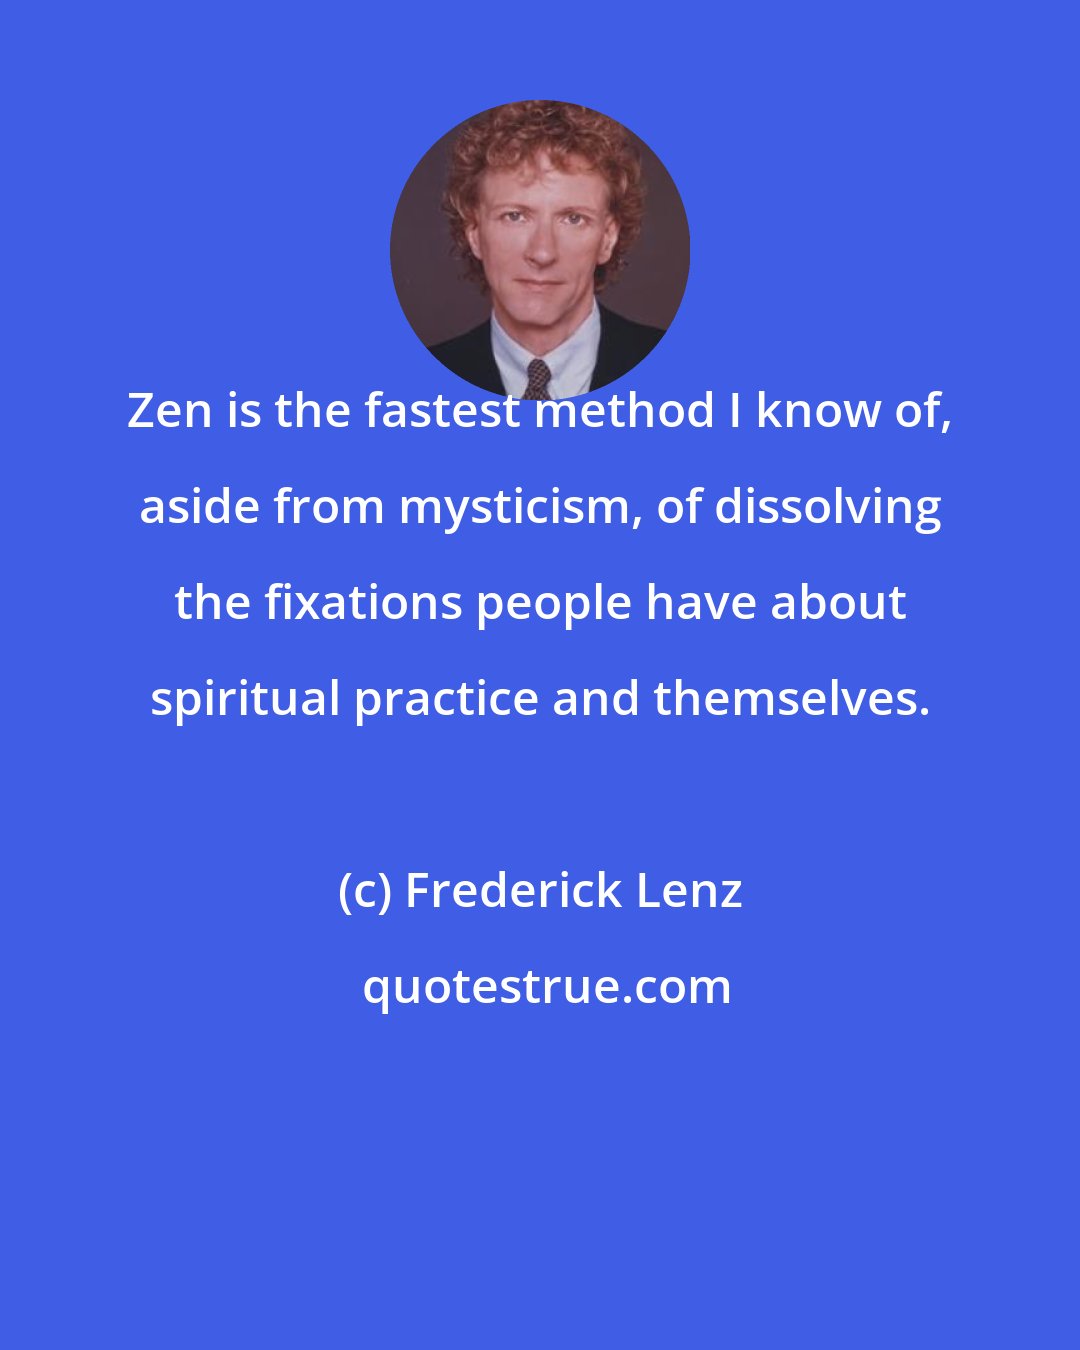 Frederick Lenz: Zen is the fastest method I know of, aside from mysticism, of dissolving the fixations people have about spiritual practice and themselves.